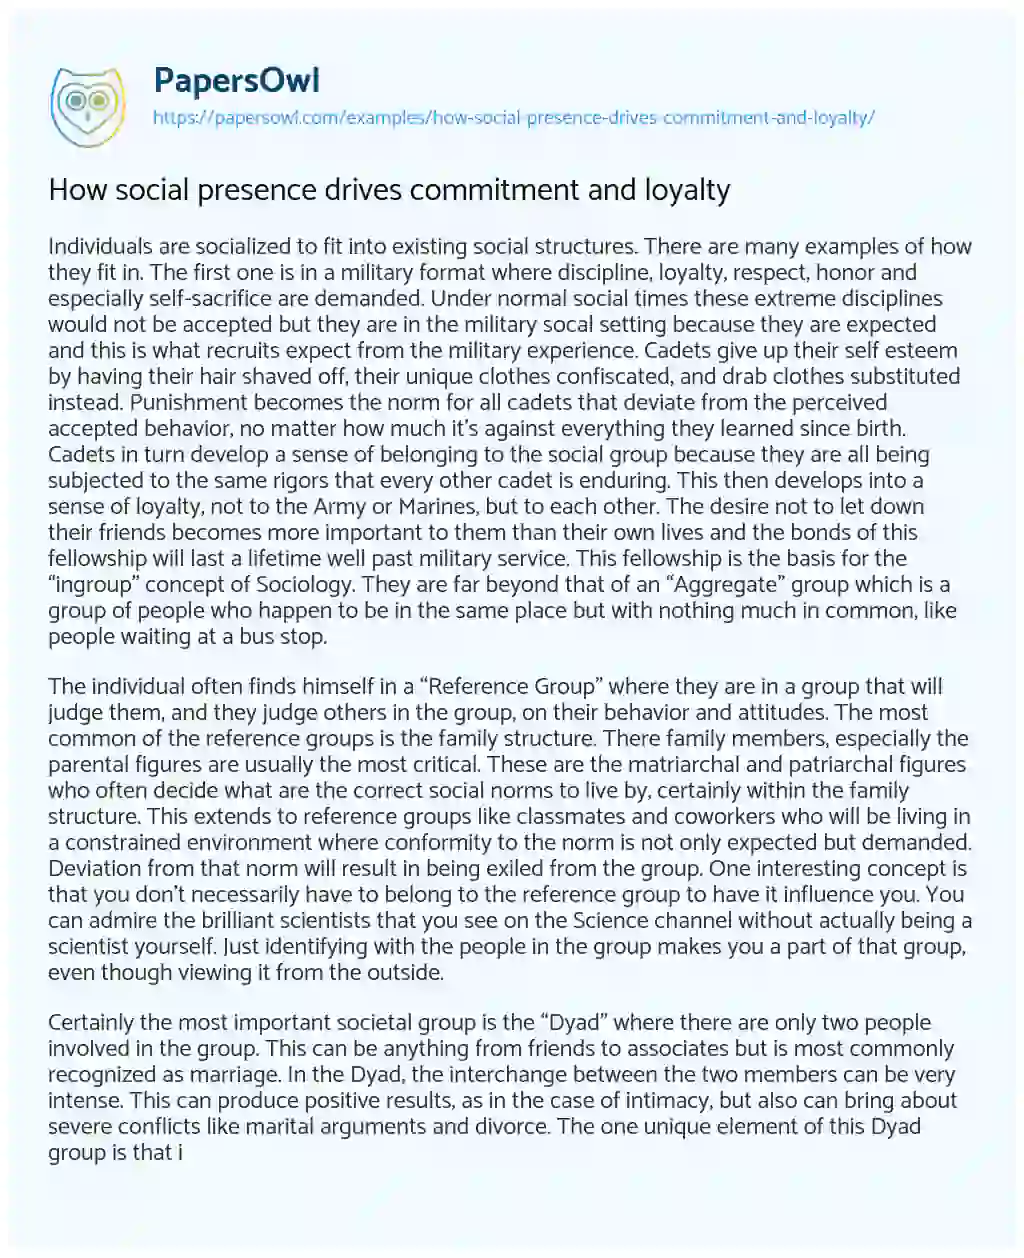 Essay on How Social Presence Drives Commitment and Loyalty